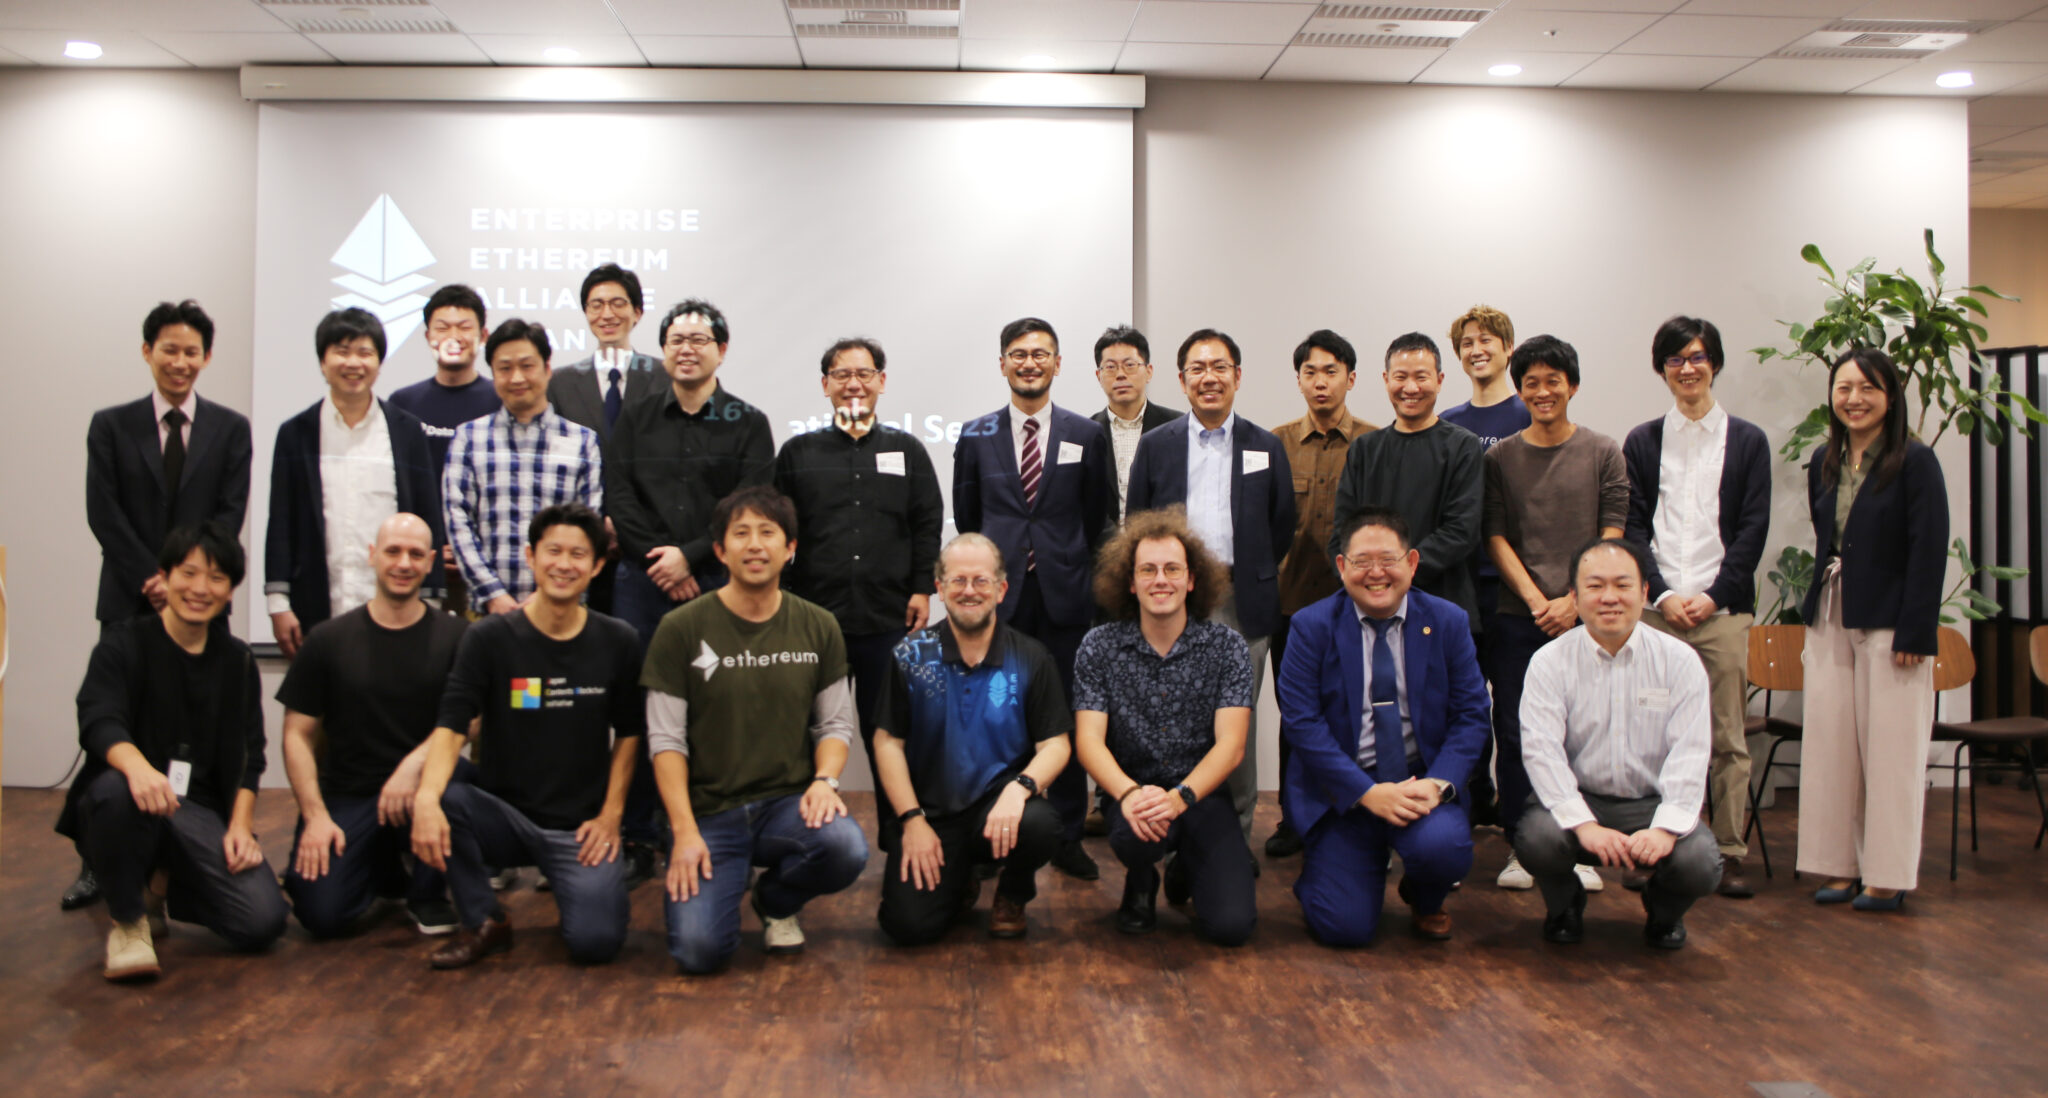 Event Report : The "Enterprise Ethereum Invitational Session" is an event focusing on the challenges and future possibilities of utilizing blockchain in business.